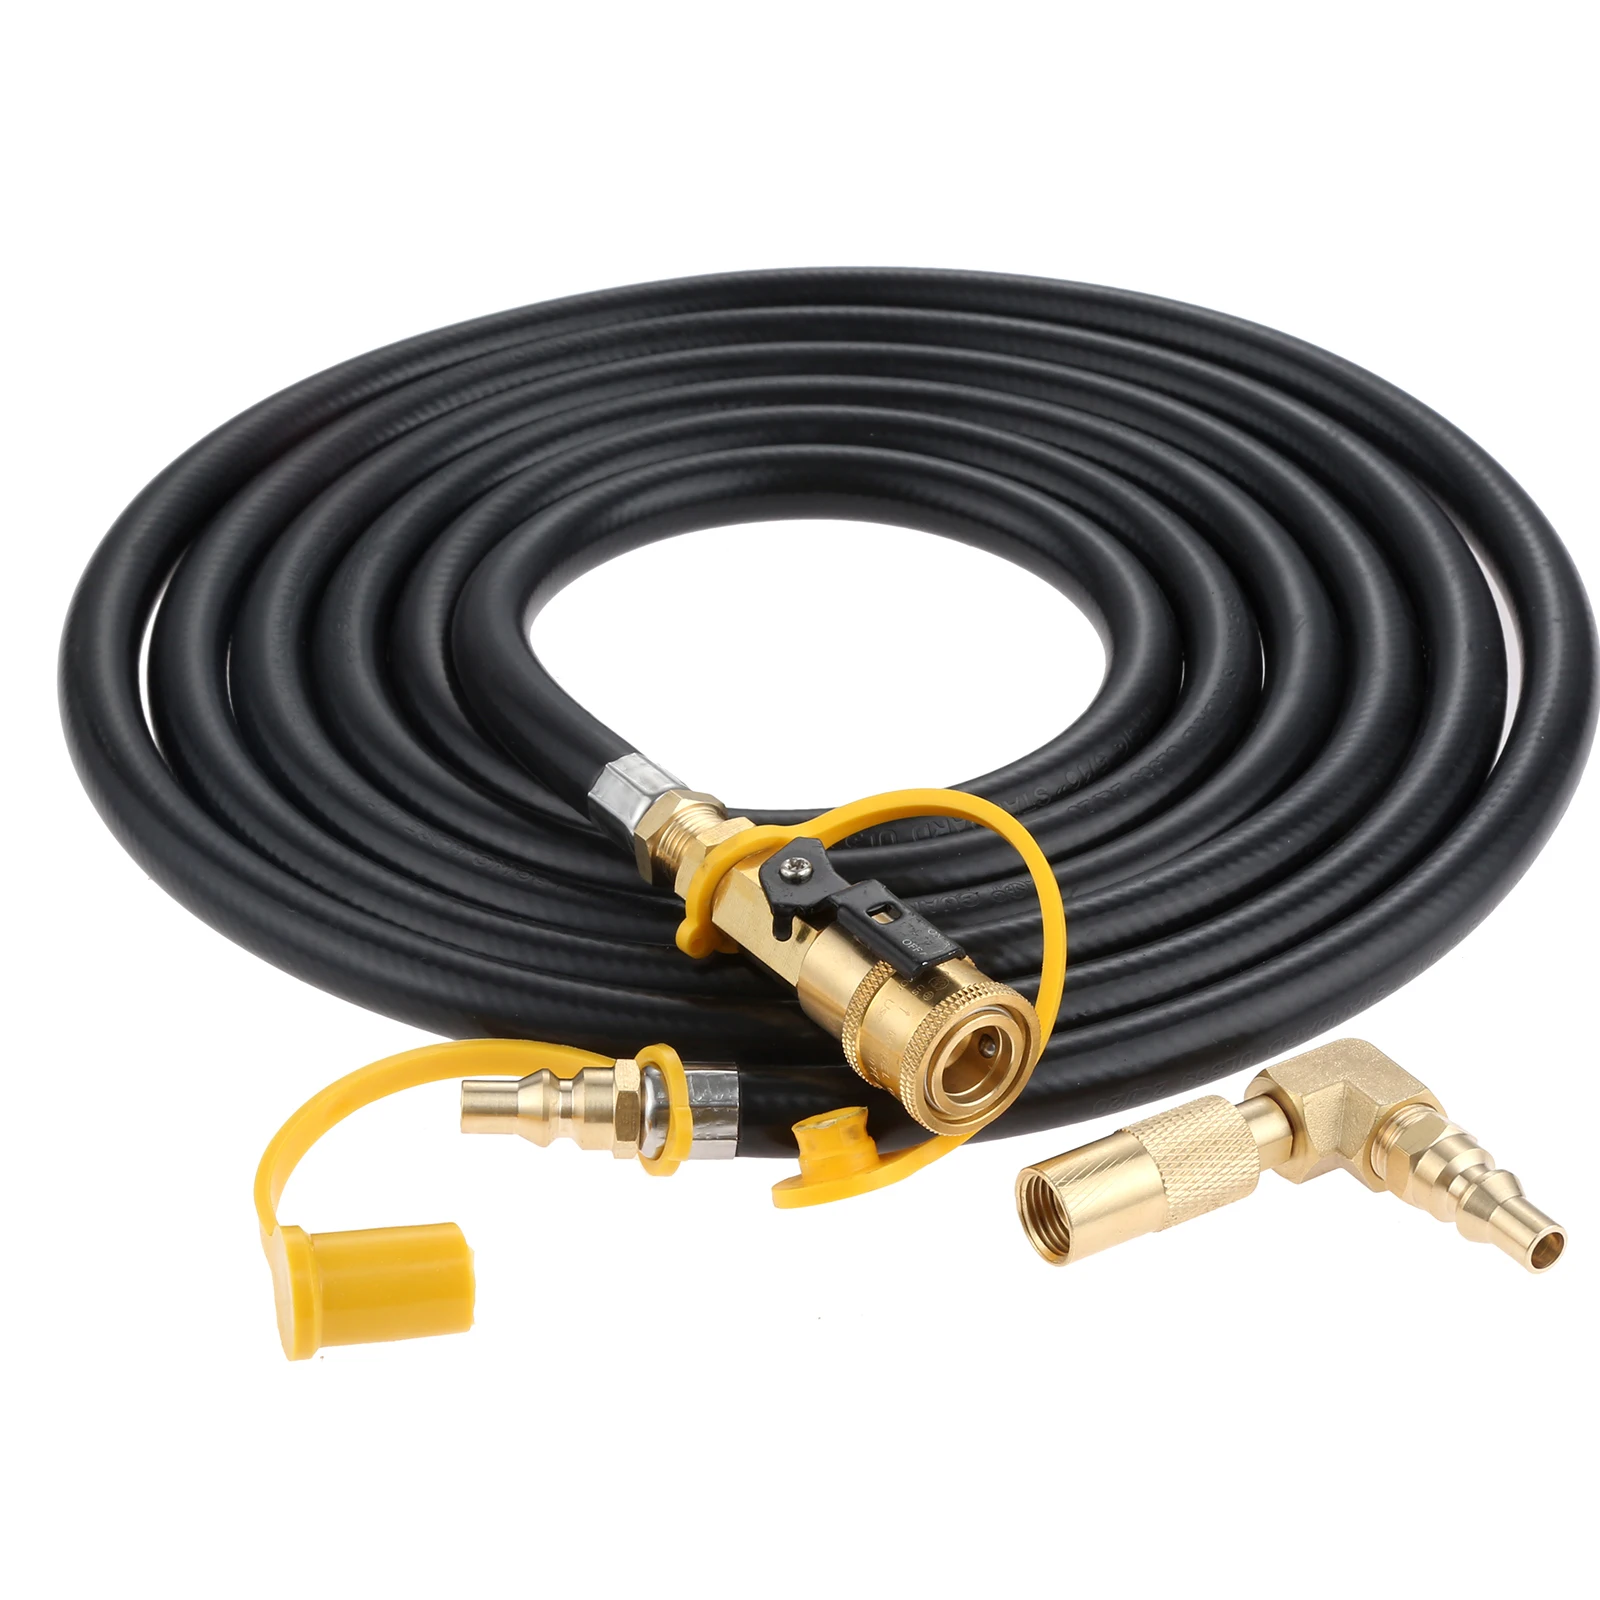 12 Feet RV Propane Quick Connect Hose with 1/4 inch Shutoff Valve Elbow Adapter for RV LP Gas 17"/22" System Blackstone Griddles